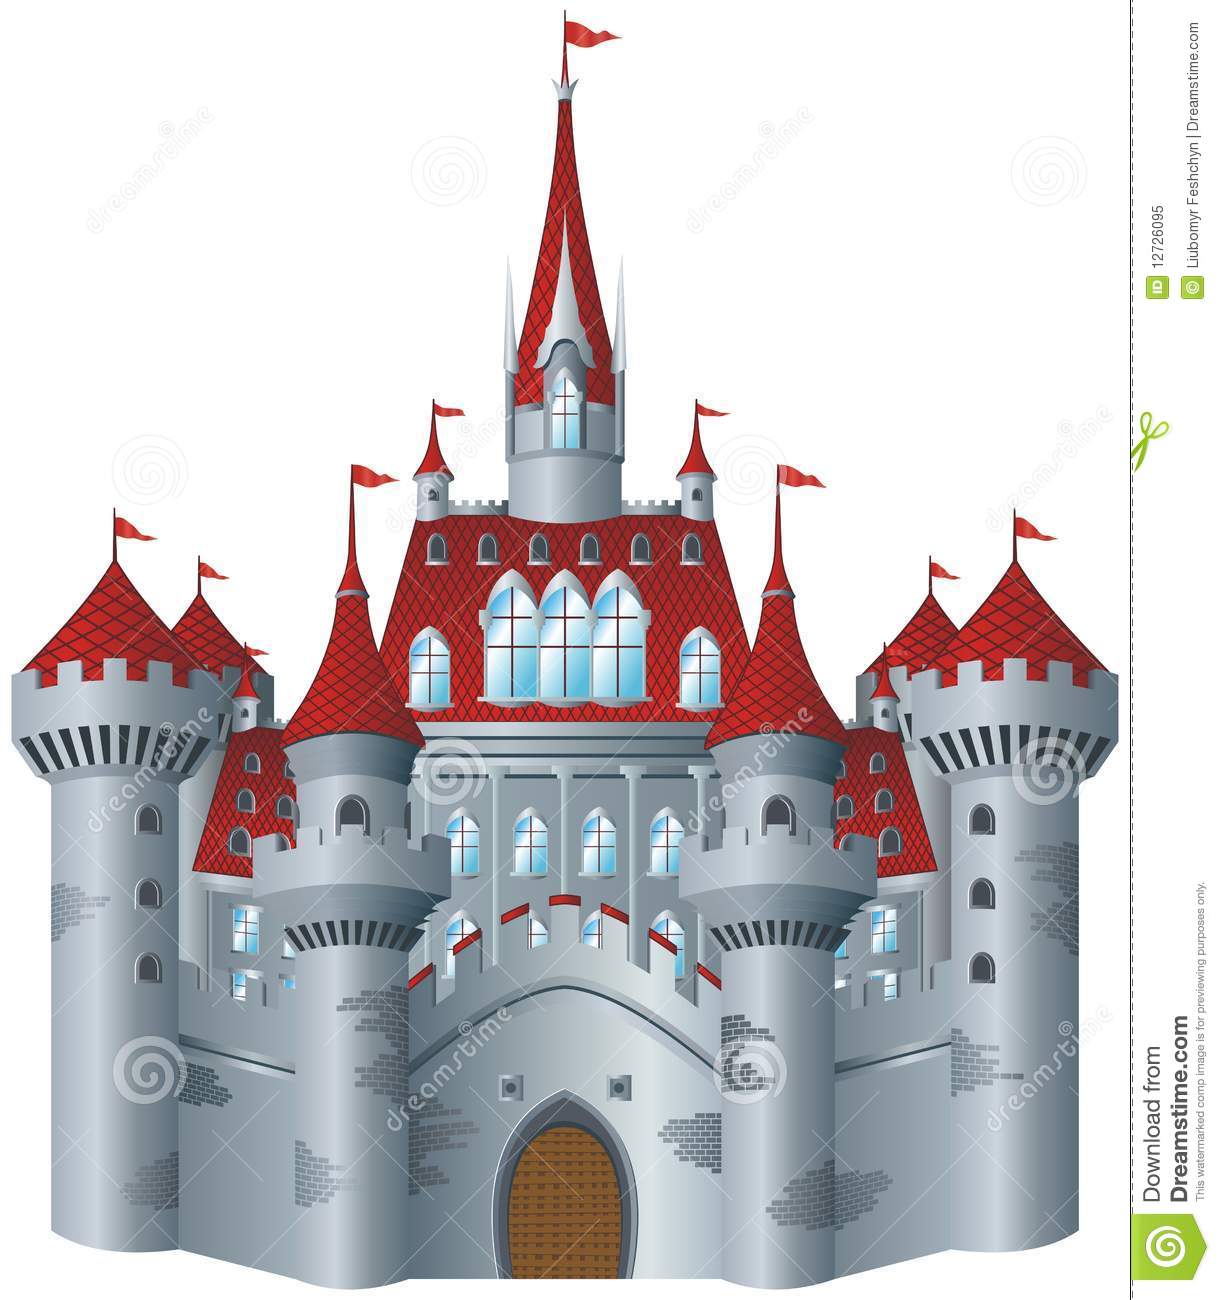 Fairy Tale Castle Royalty Free Stock Photo   Image  12726095